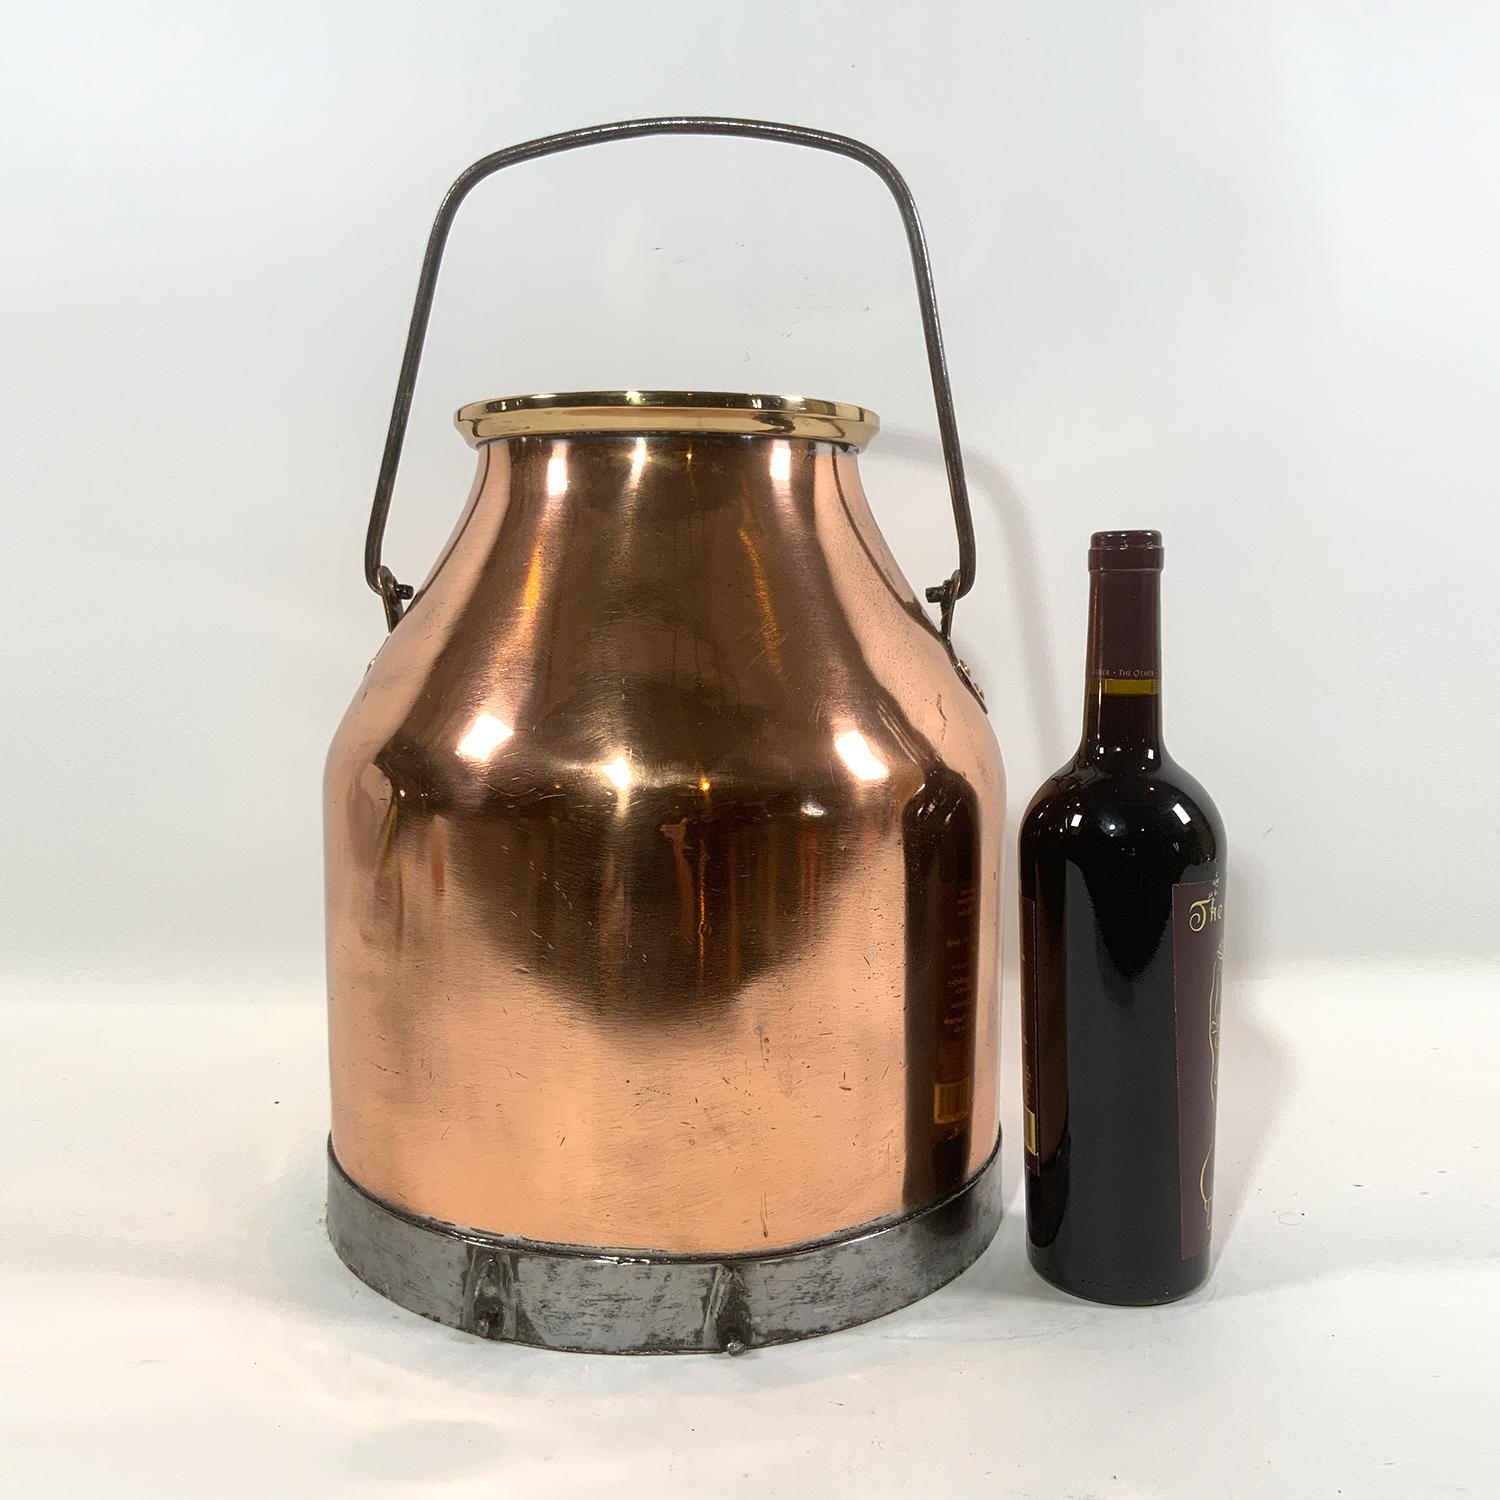 Polished copper cream pail with brass and nickel trim with steel carry handle.